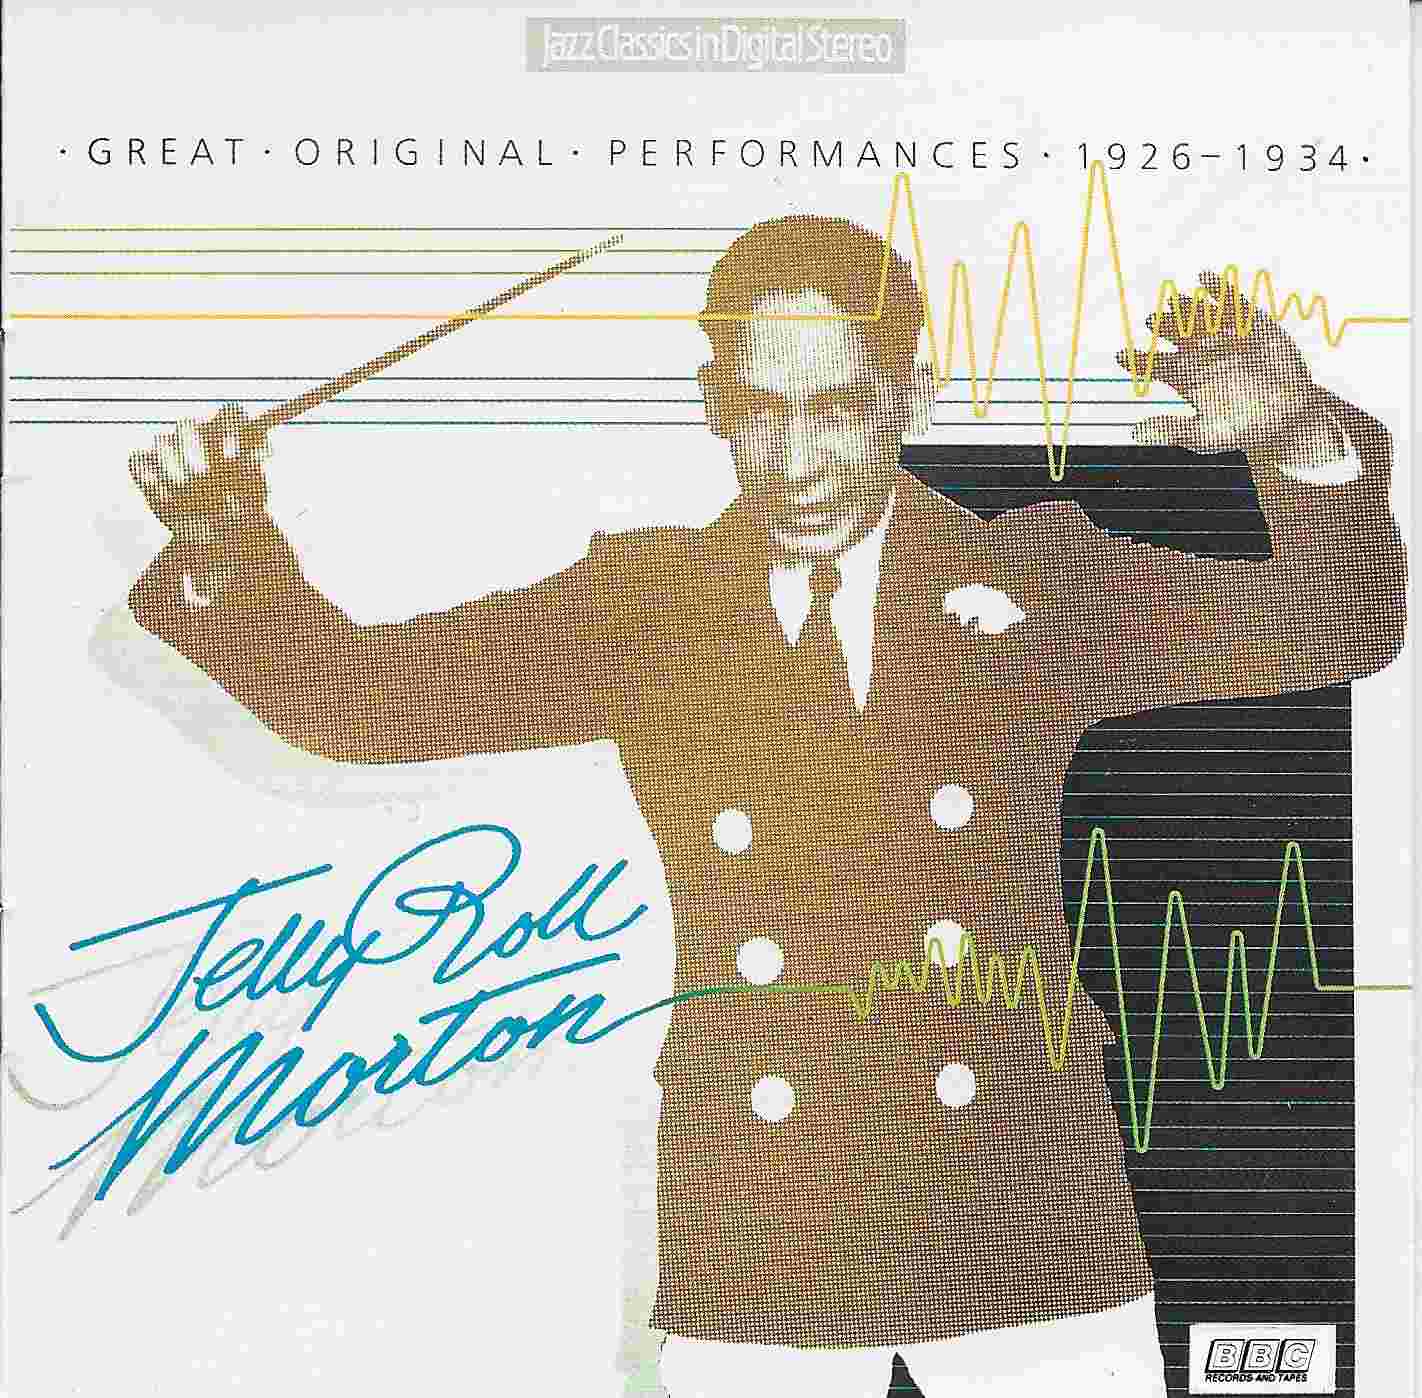 Picture of BBCCD604 Jazz Classics - Jelly Roll Morton by artist Jelly Roll Morton from the BBC cds - Records and Tapes library